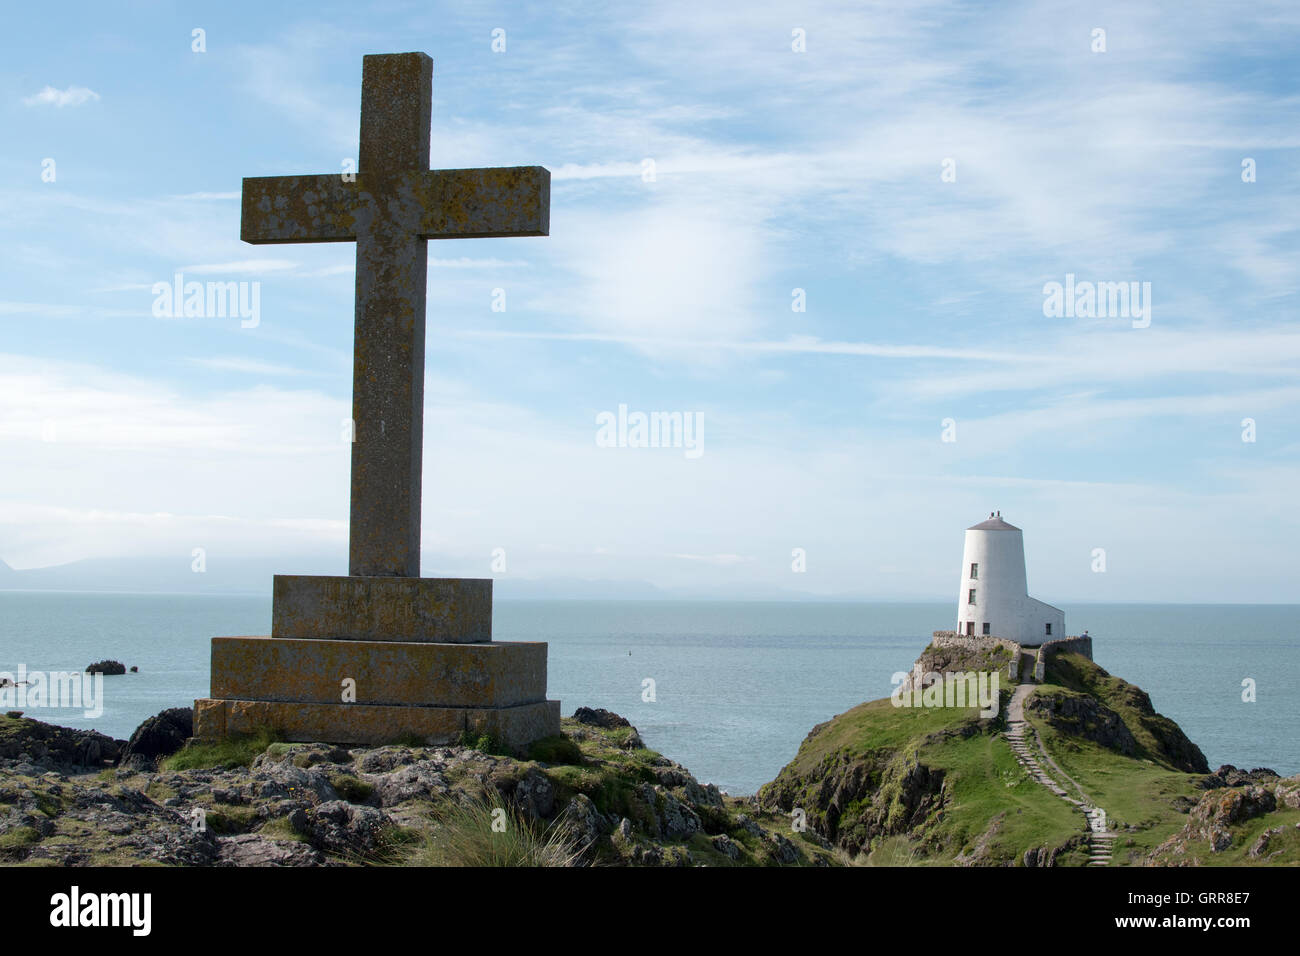 Tŵr Mawr lighthouse and cross at Llanddwyn.island Anglesey North Wales Stock Photo